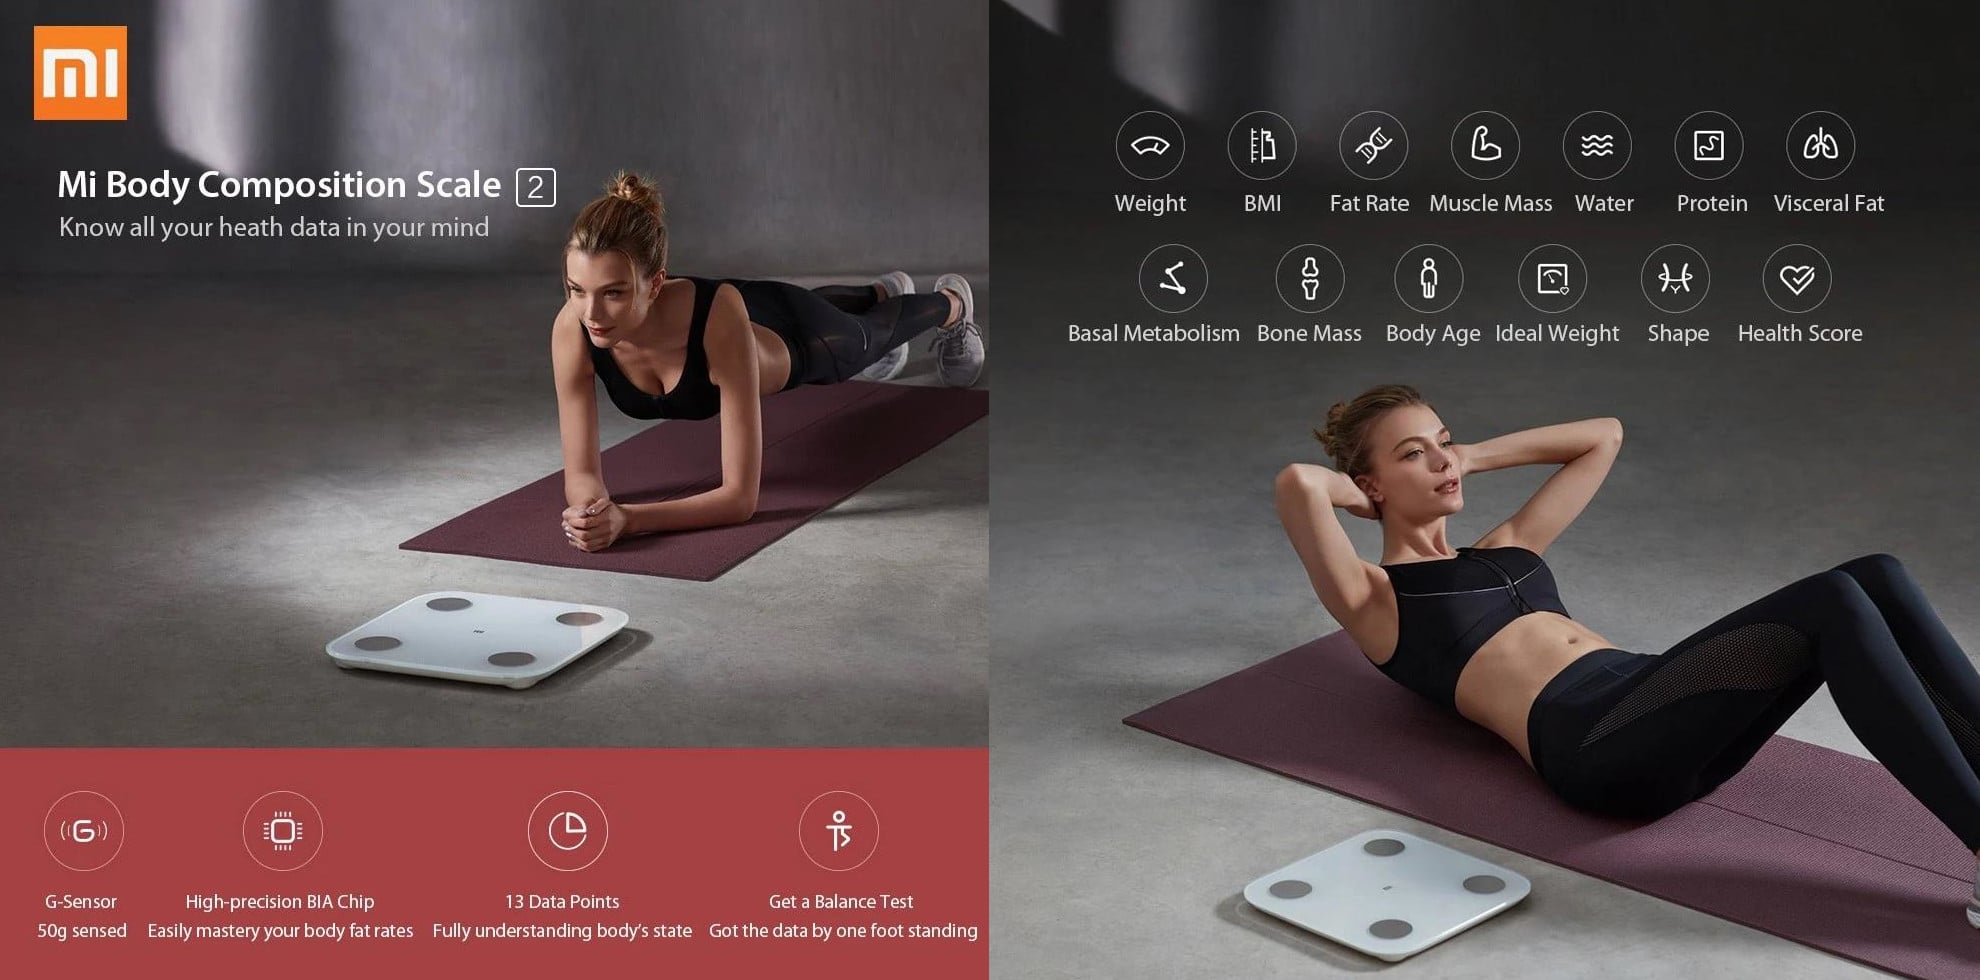 Make your own now the Xiaomi Mi Body Composition Scale 2 at € 26,34 from  Germany and without shipping costs - News by Xiaomi Miui Hellas